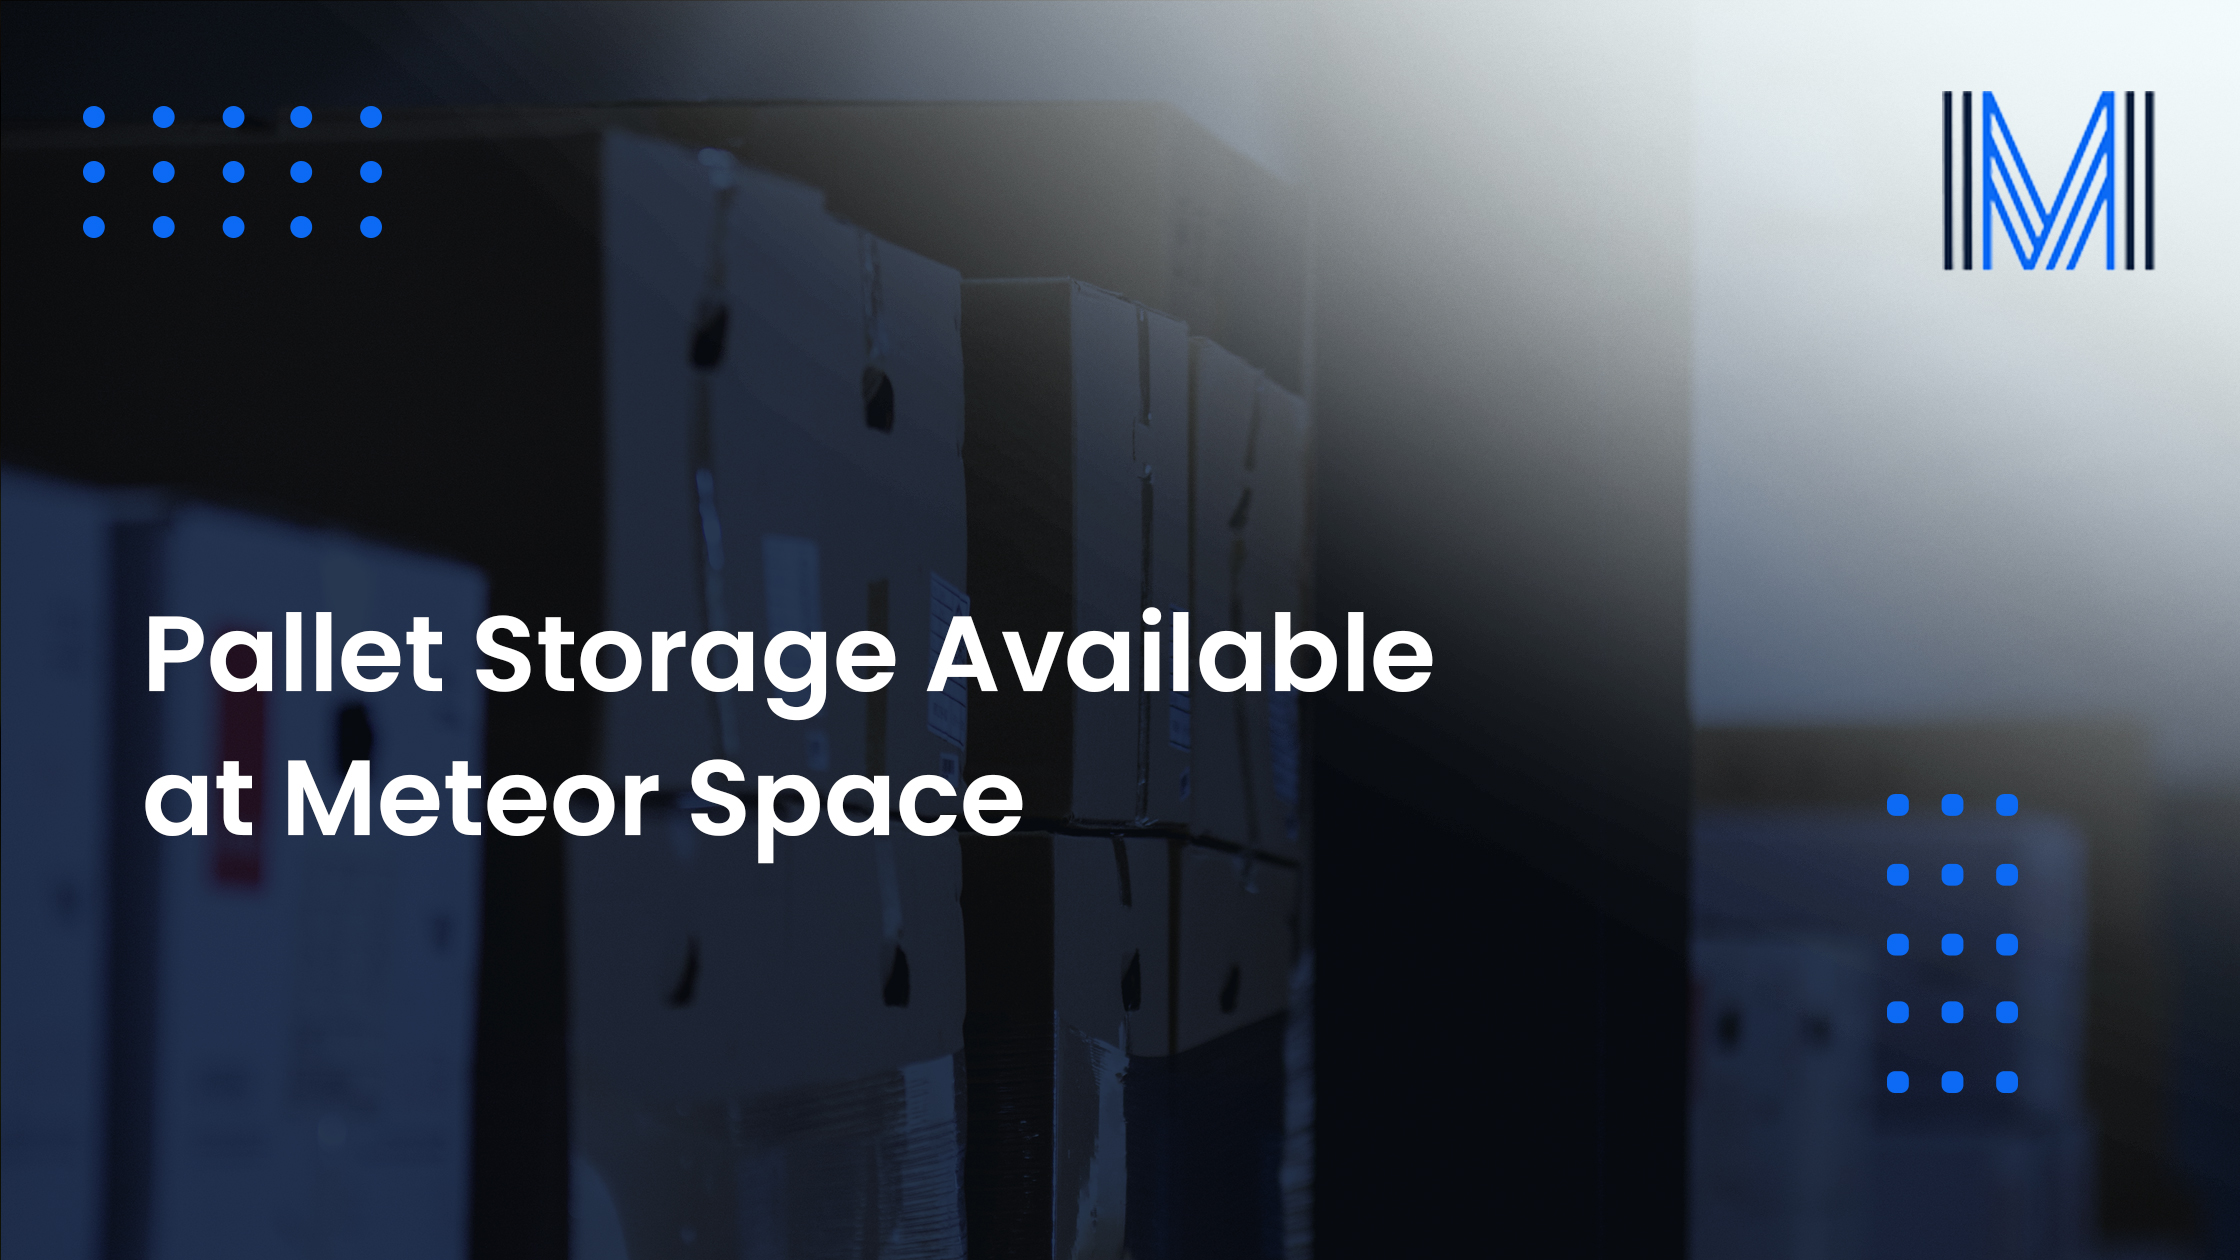 Pallet Storage Available at Meteor Space